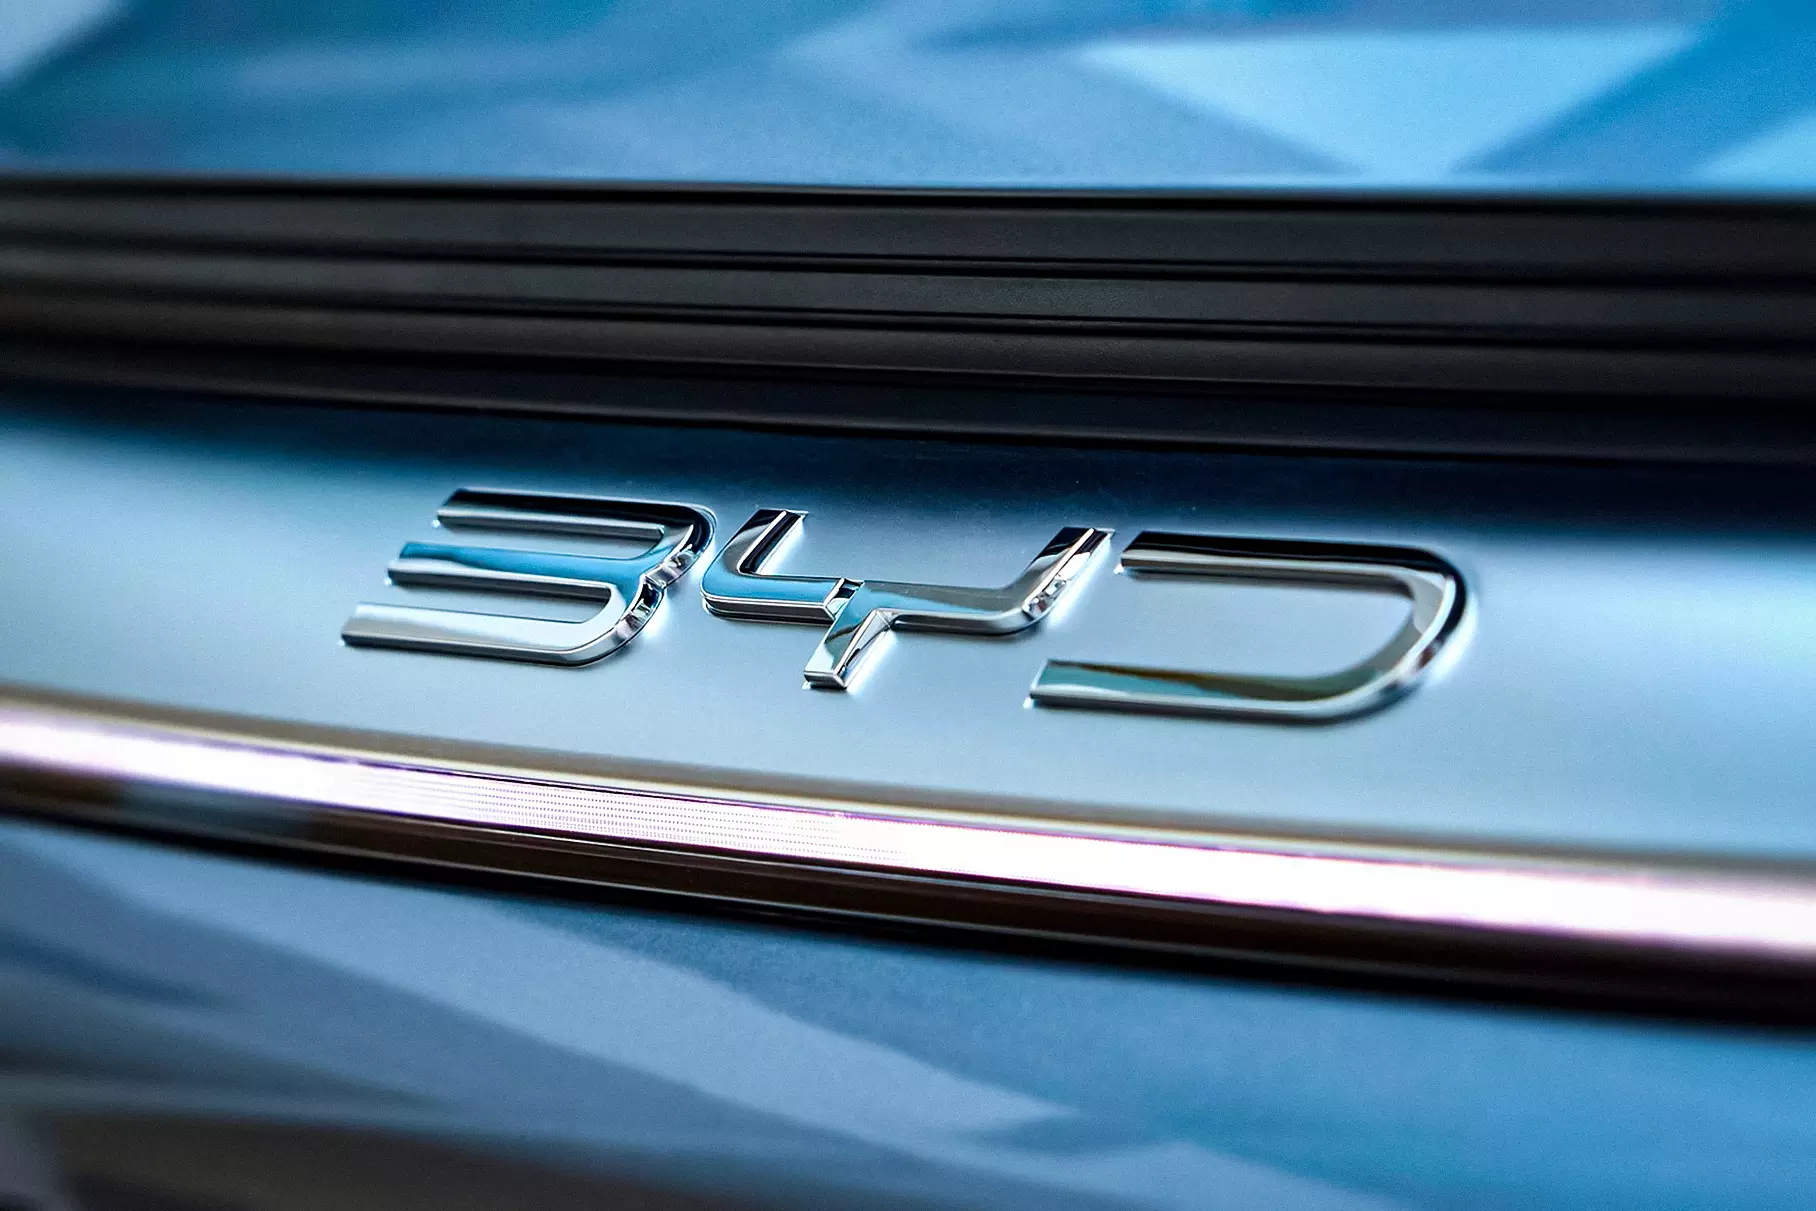 BYD has almost reached Tesla’s sales level in the electric car segment